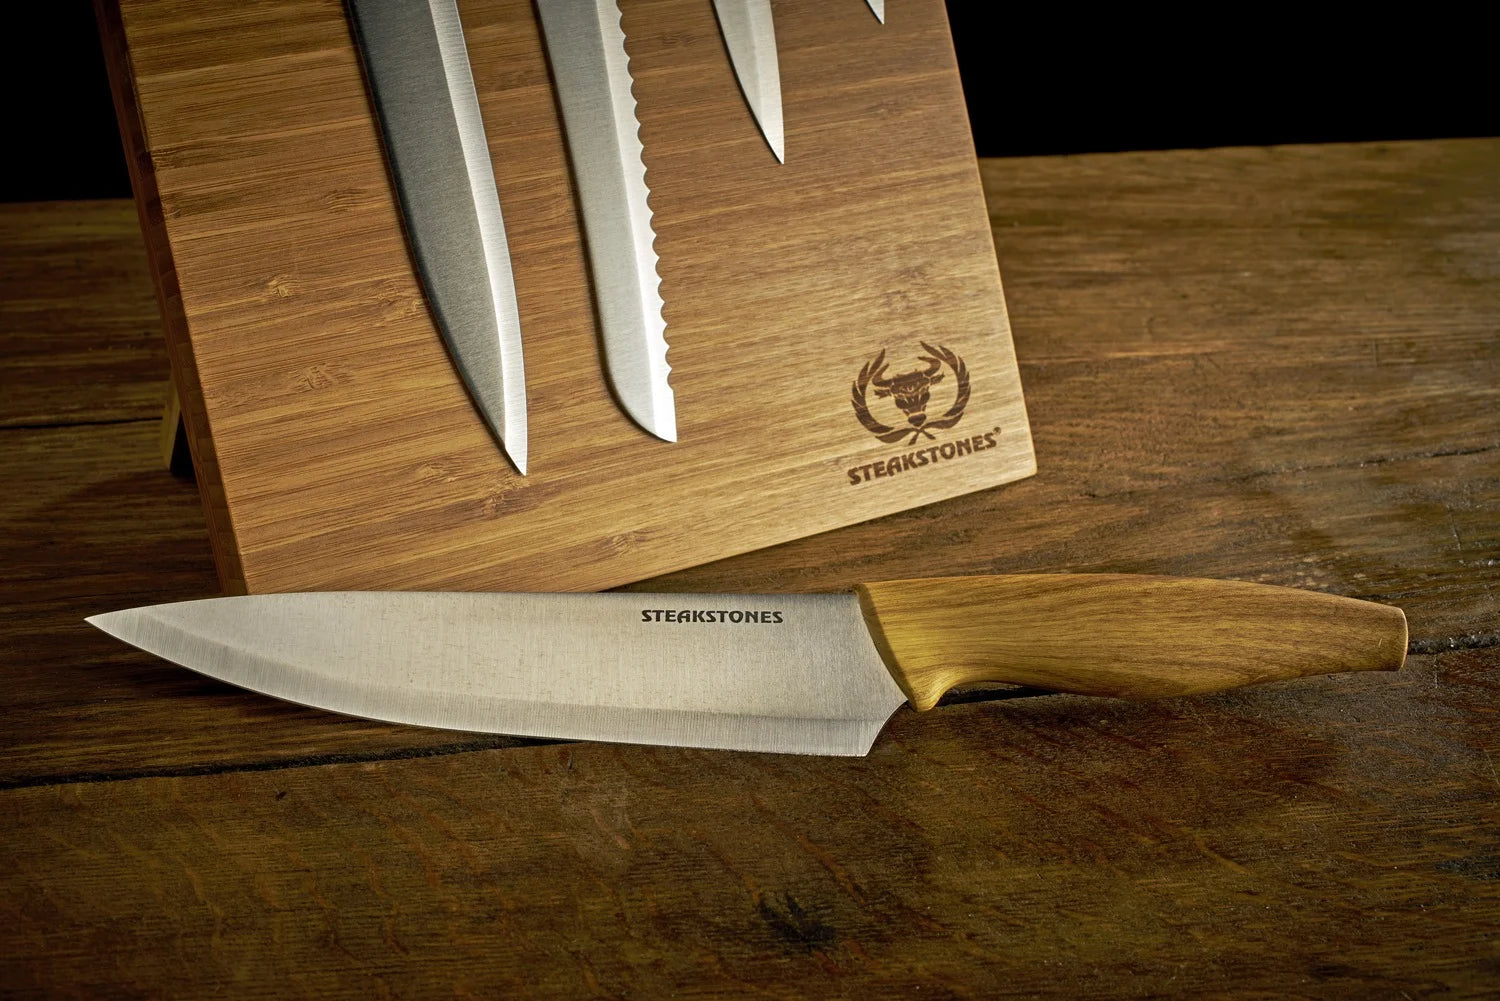 Set of 5 Stainless Steel Kitchen Knives